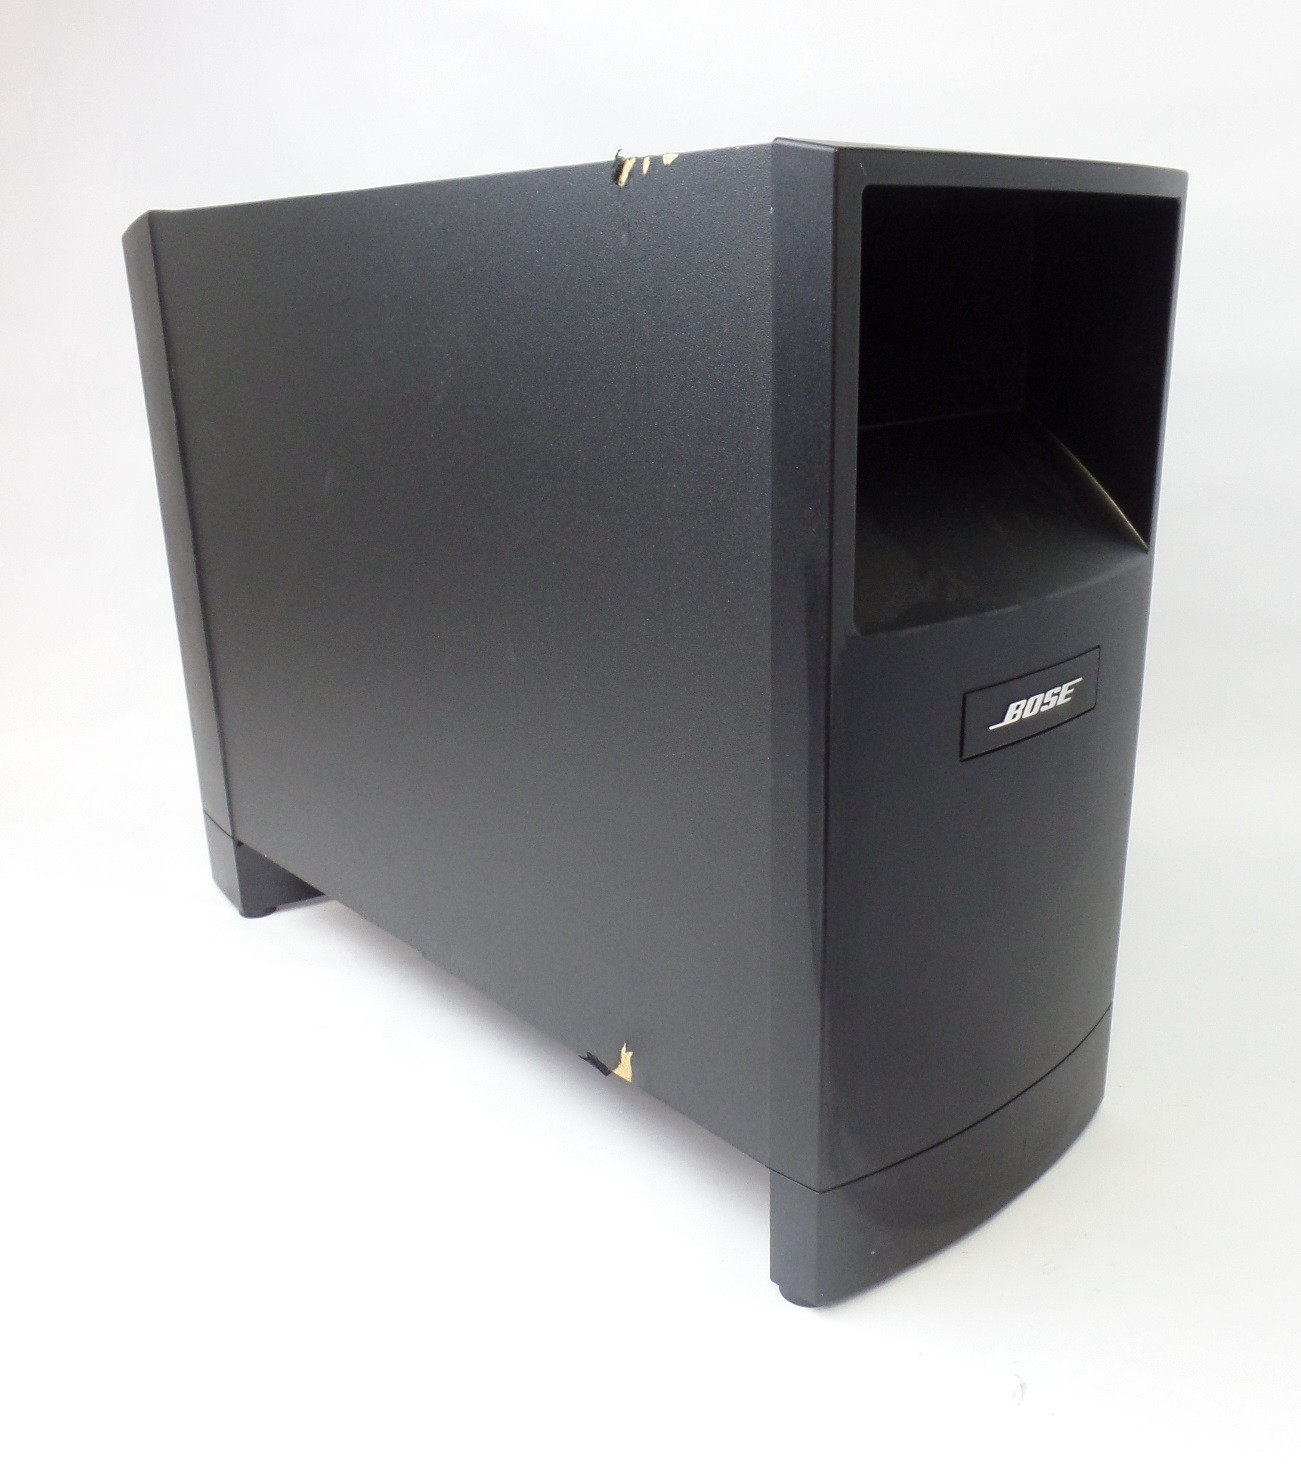 Bose Acoustimass 6 III Subwoofer Only, Untested , AS IS